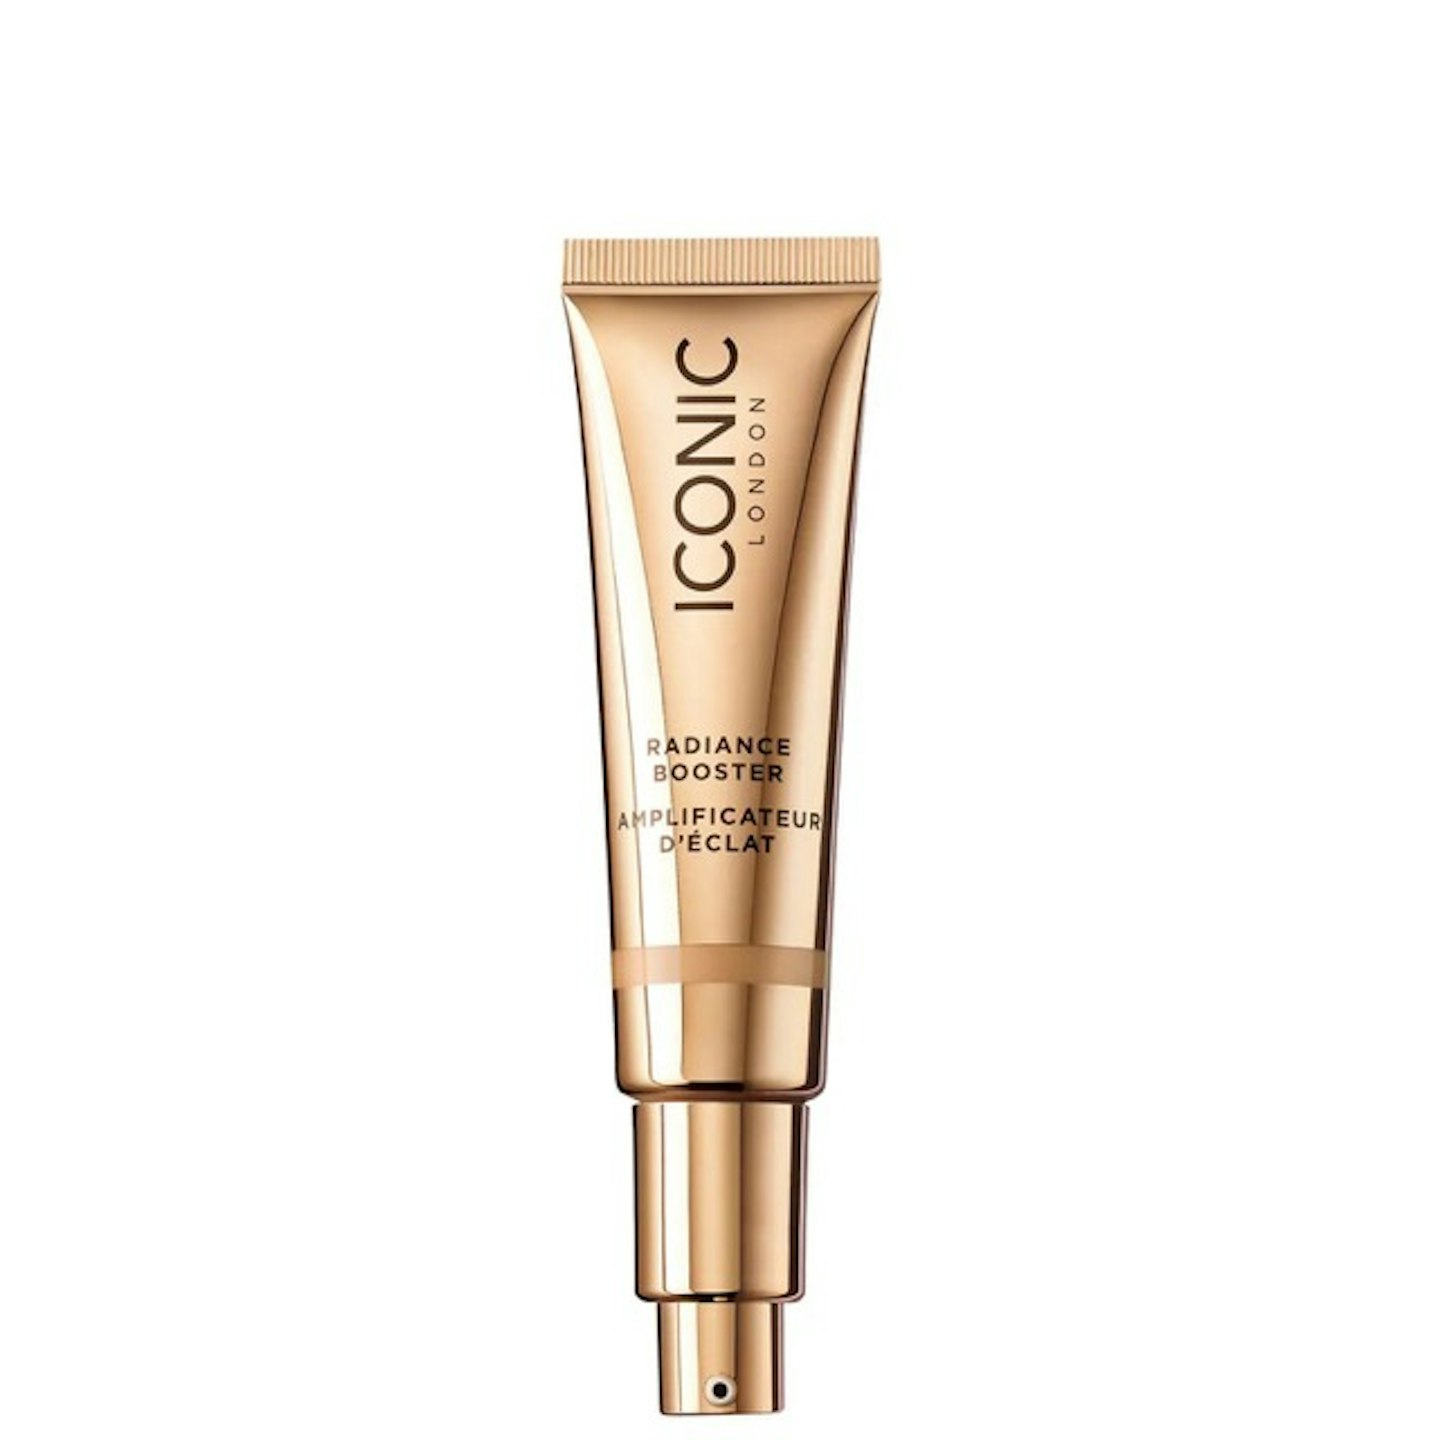 ICONIC London's Radiance Booster